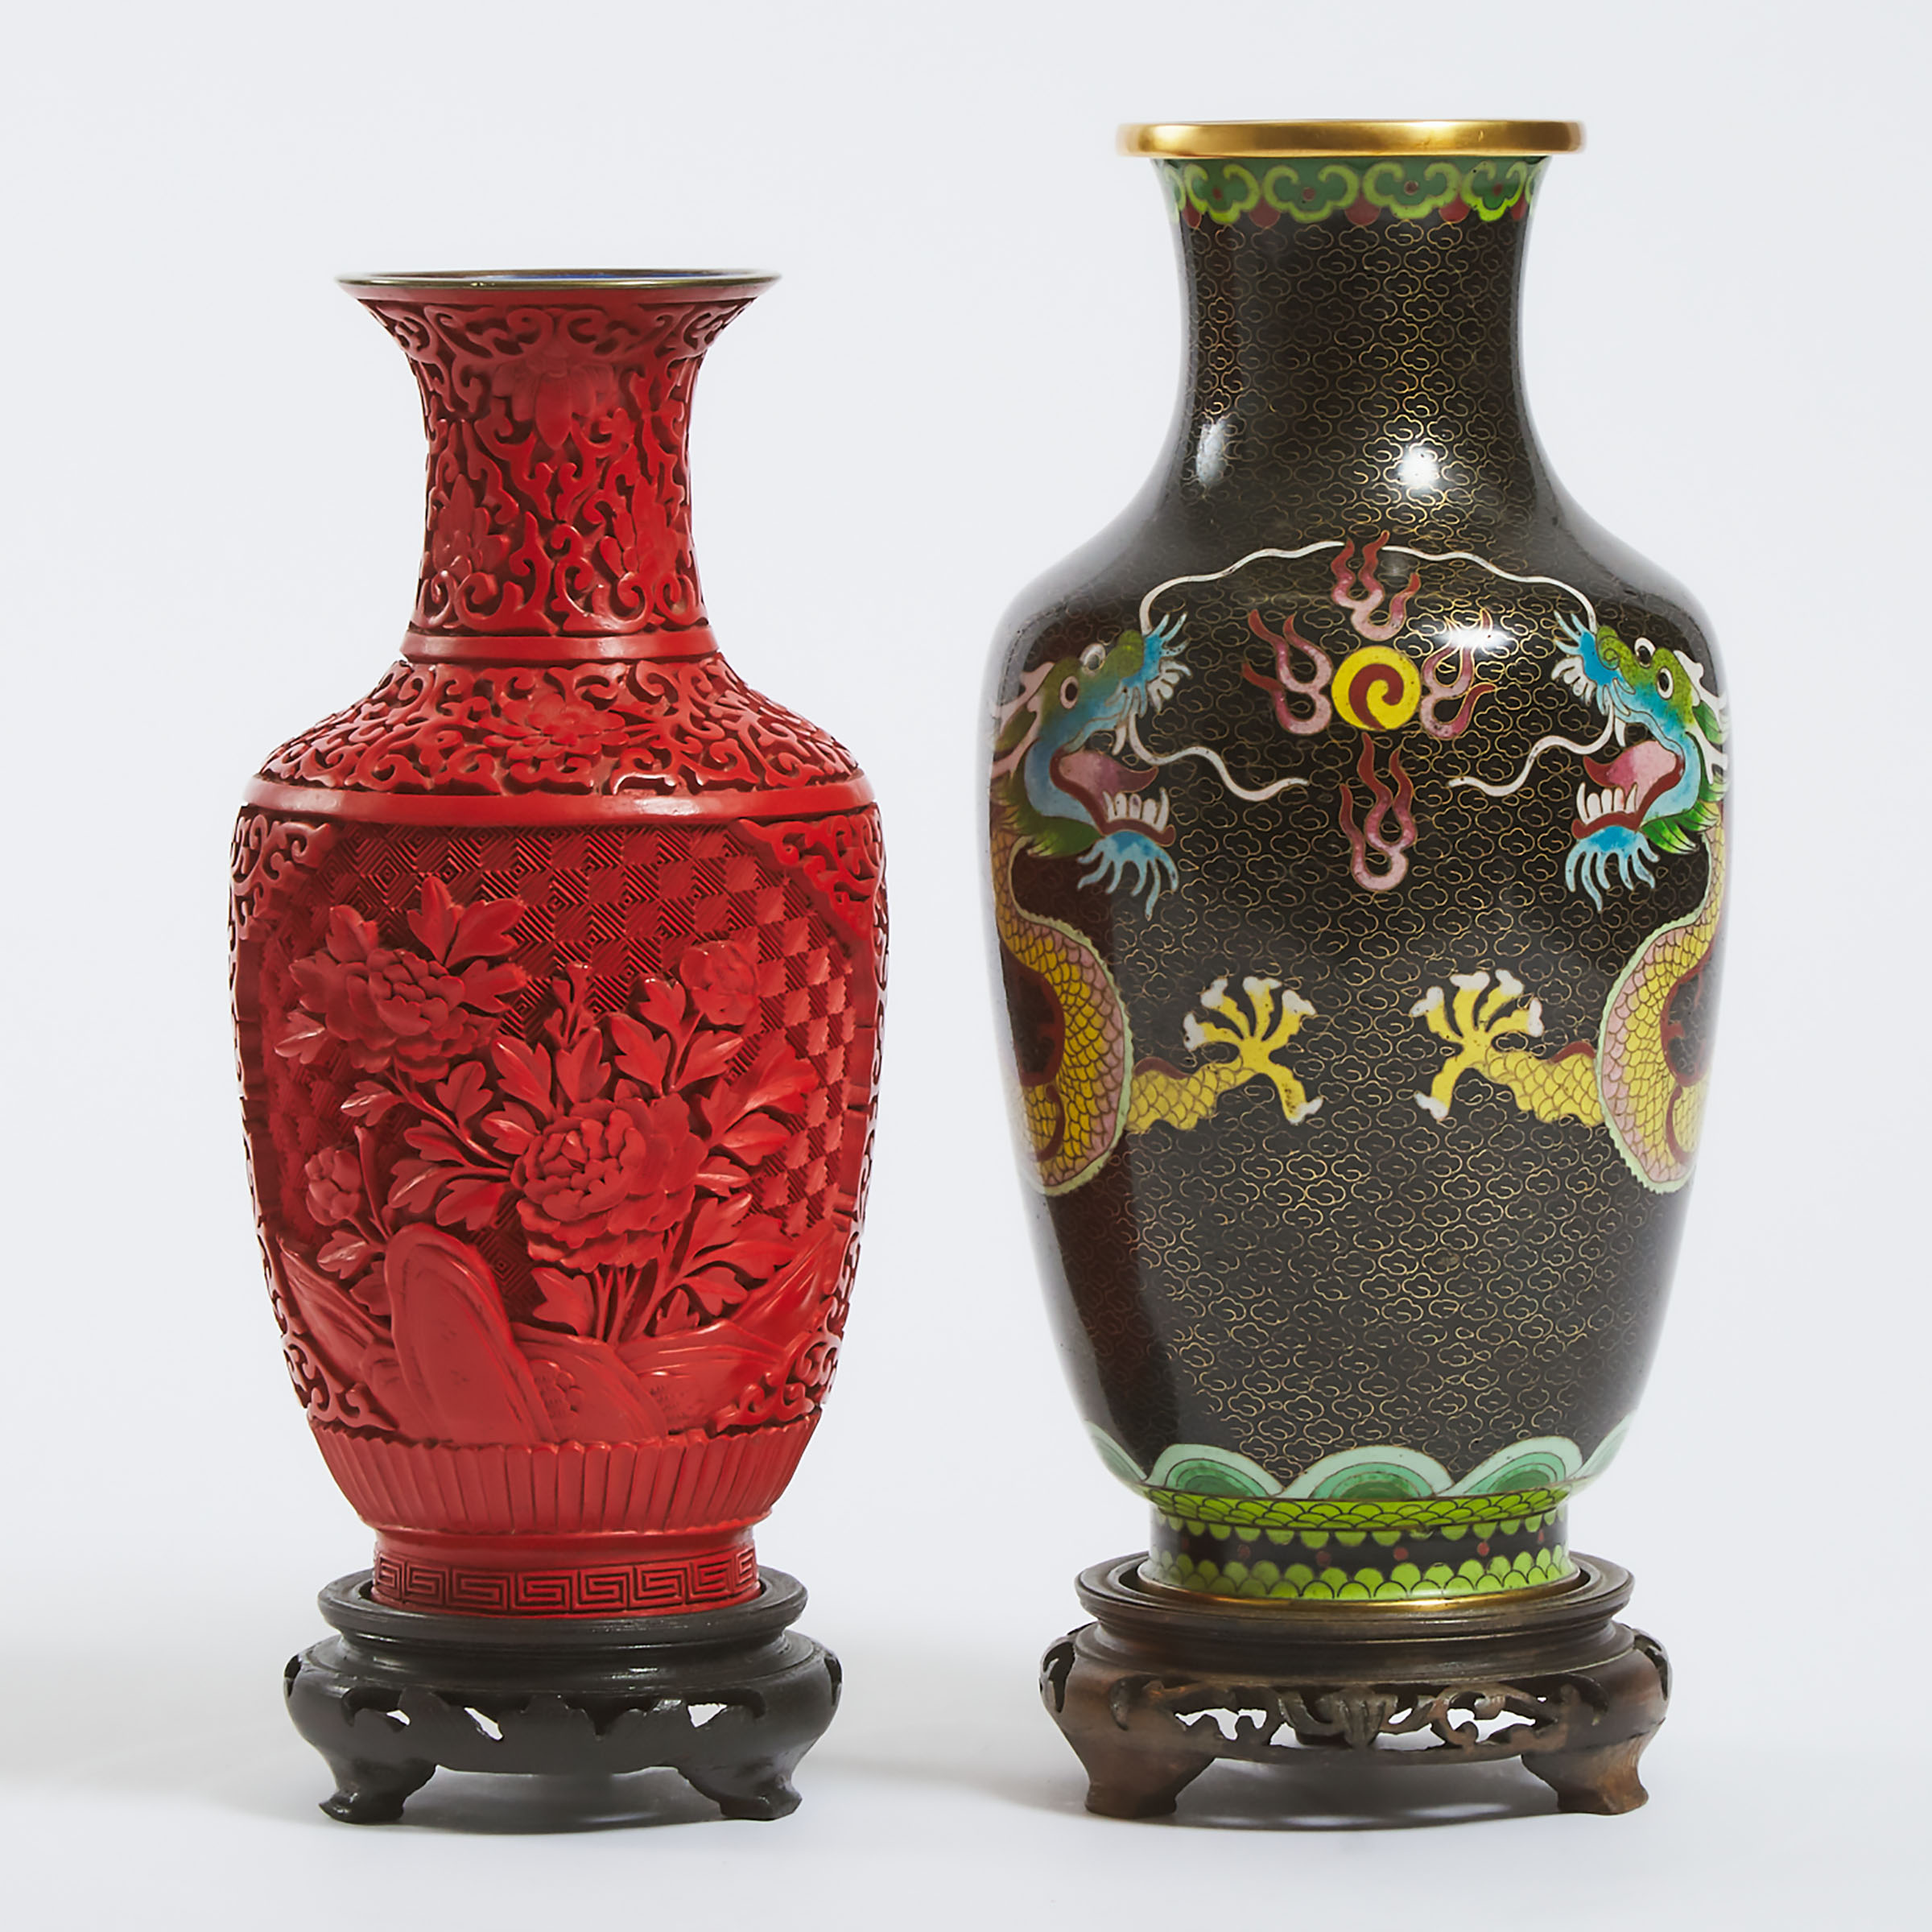 A Chinese Lacquer Vase, Together With a Black Ground Cloisonné 'Dragon' Vase, Mid 20th Century